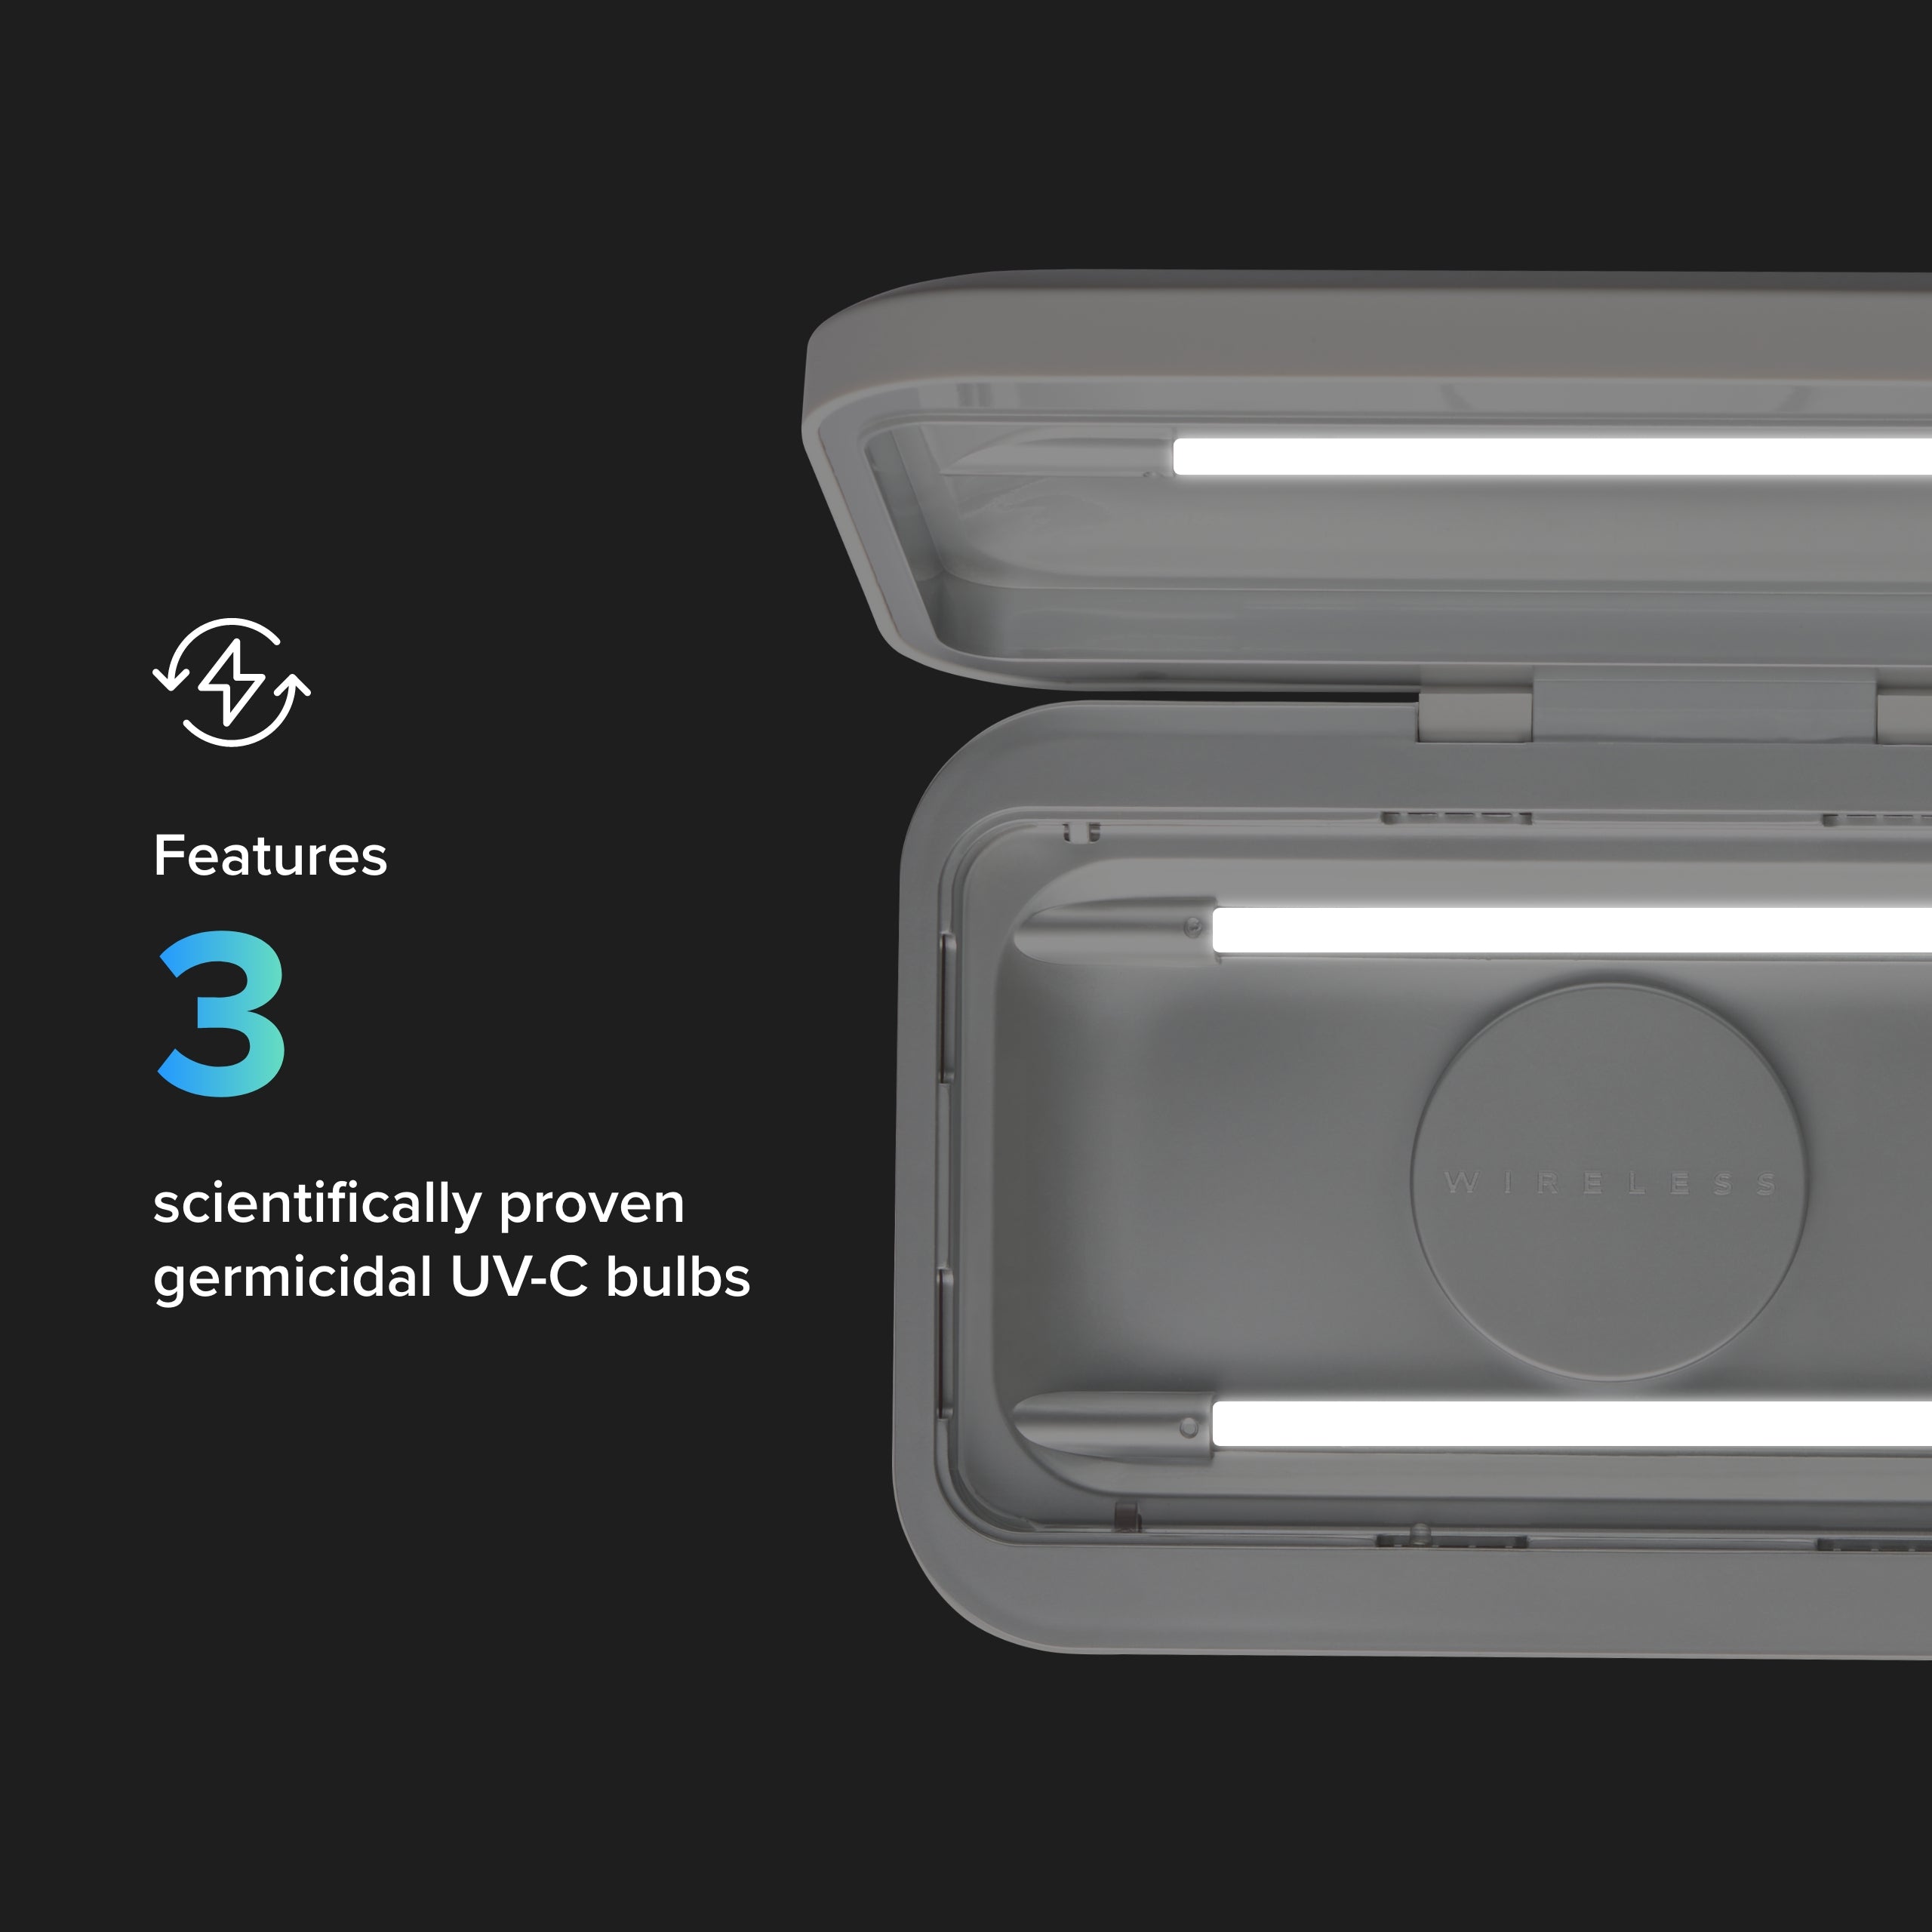 Buy PhoneSoap Wireless - Wireless Charger and Sanitizer for Phones